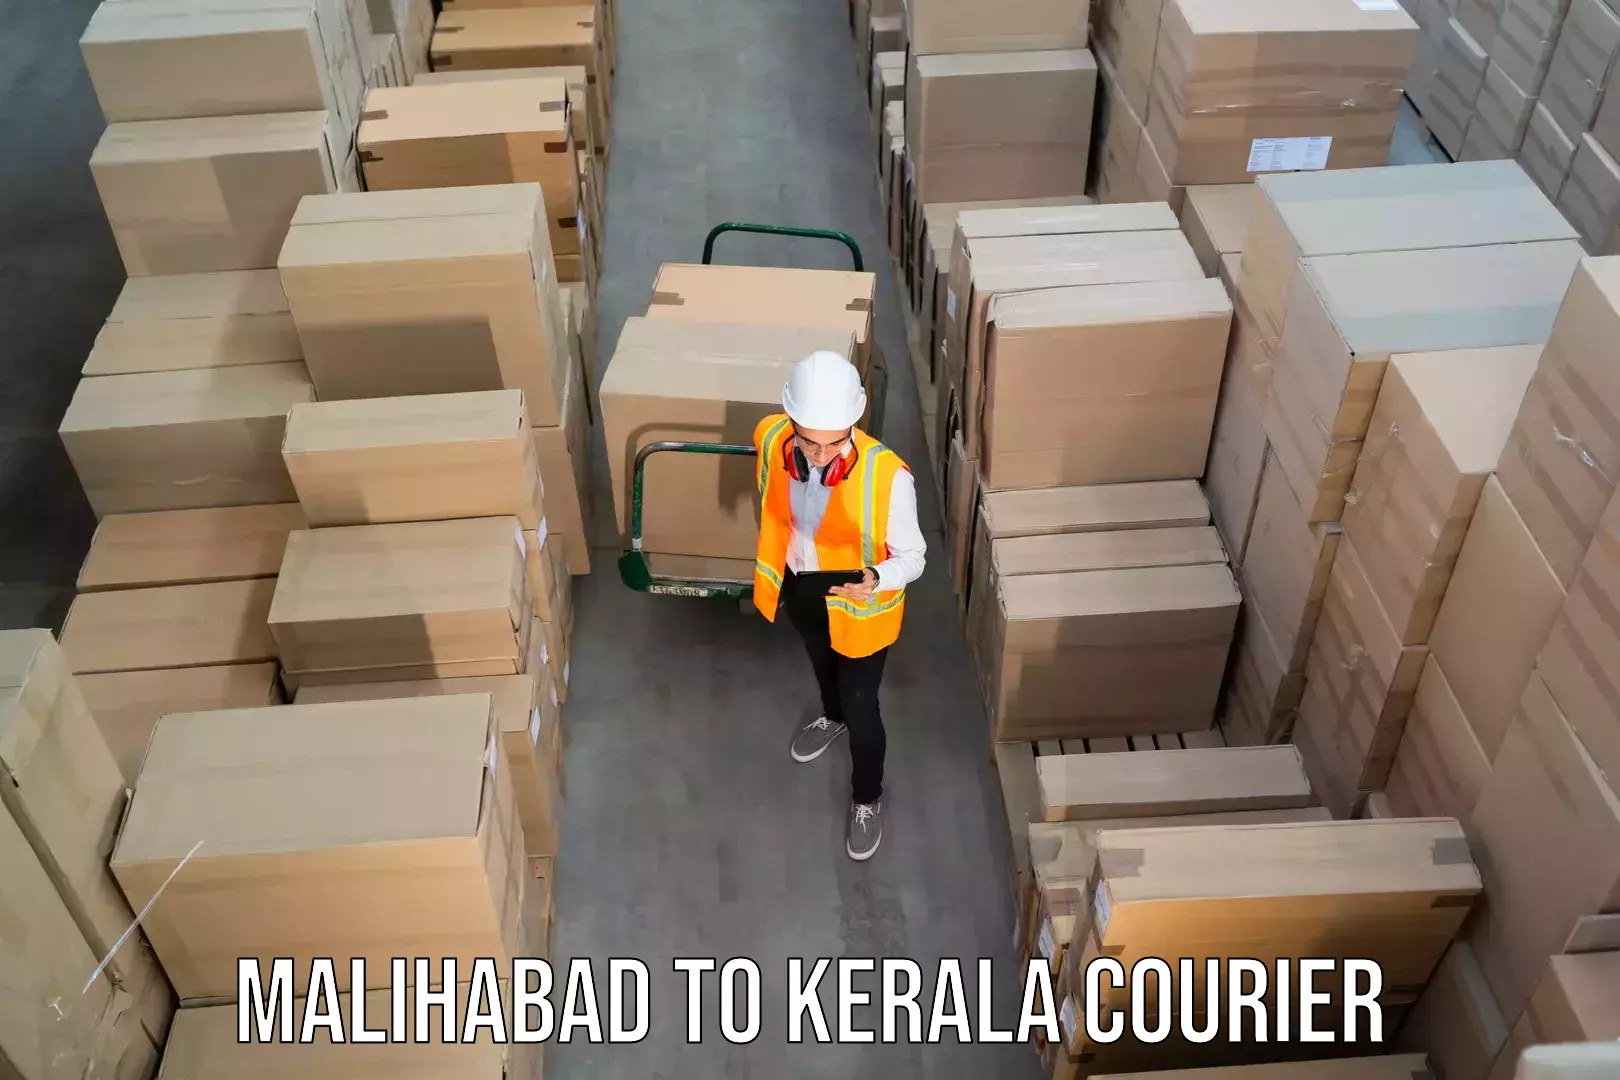 Nationwide delivery network Malihabad to Kozhikode